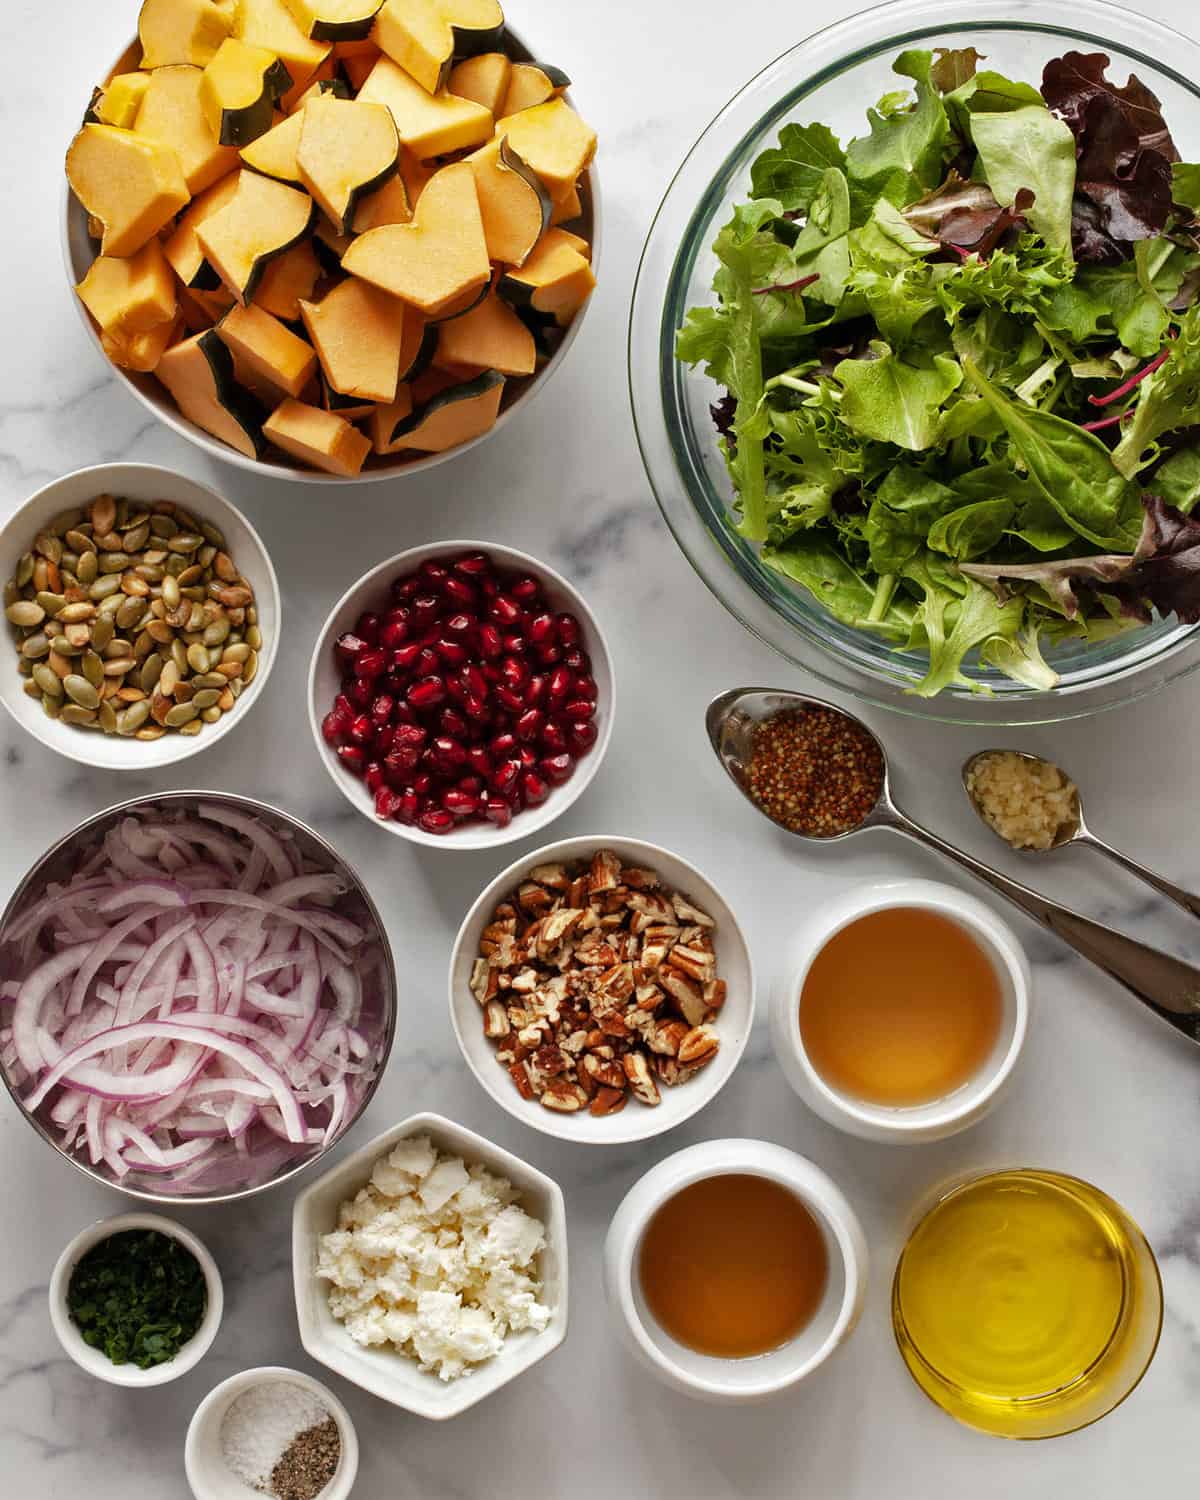 Ingredients including squash, lettuce, red onions, pomegranate seeds, pumpkin seeds, pecans, goat cheese, parsley and olive oil.